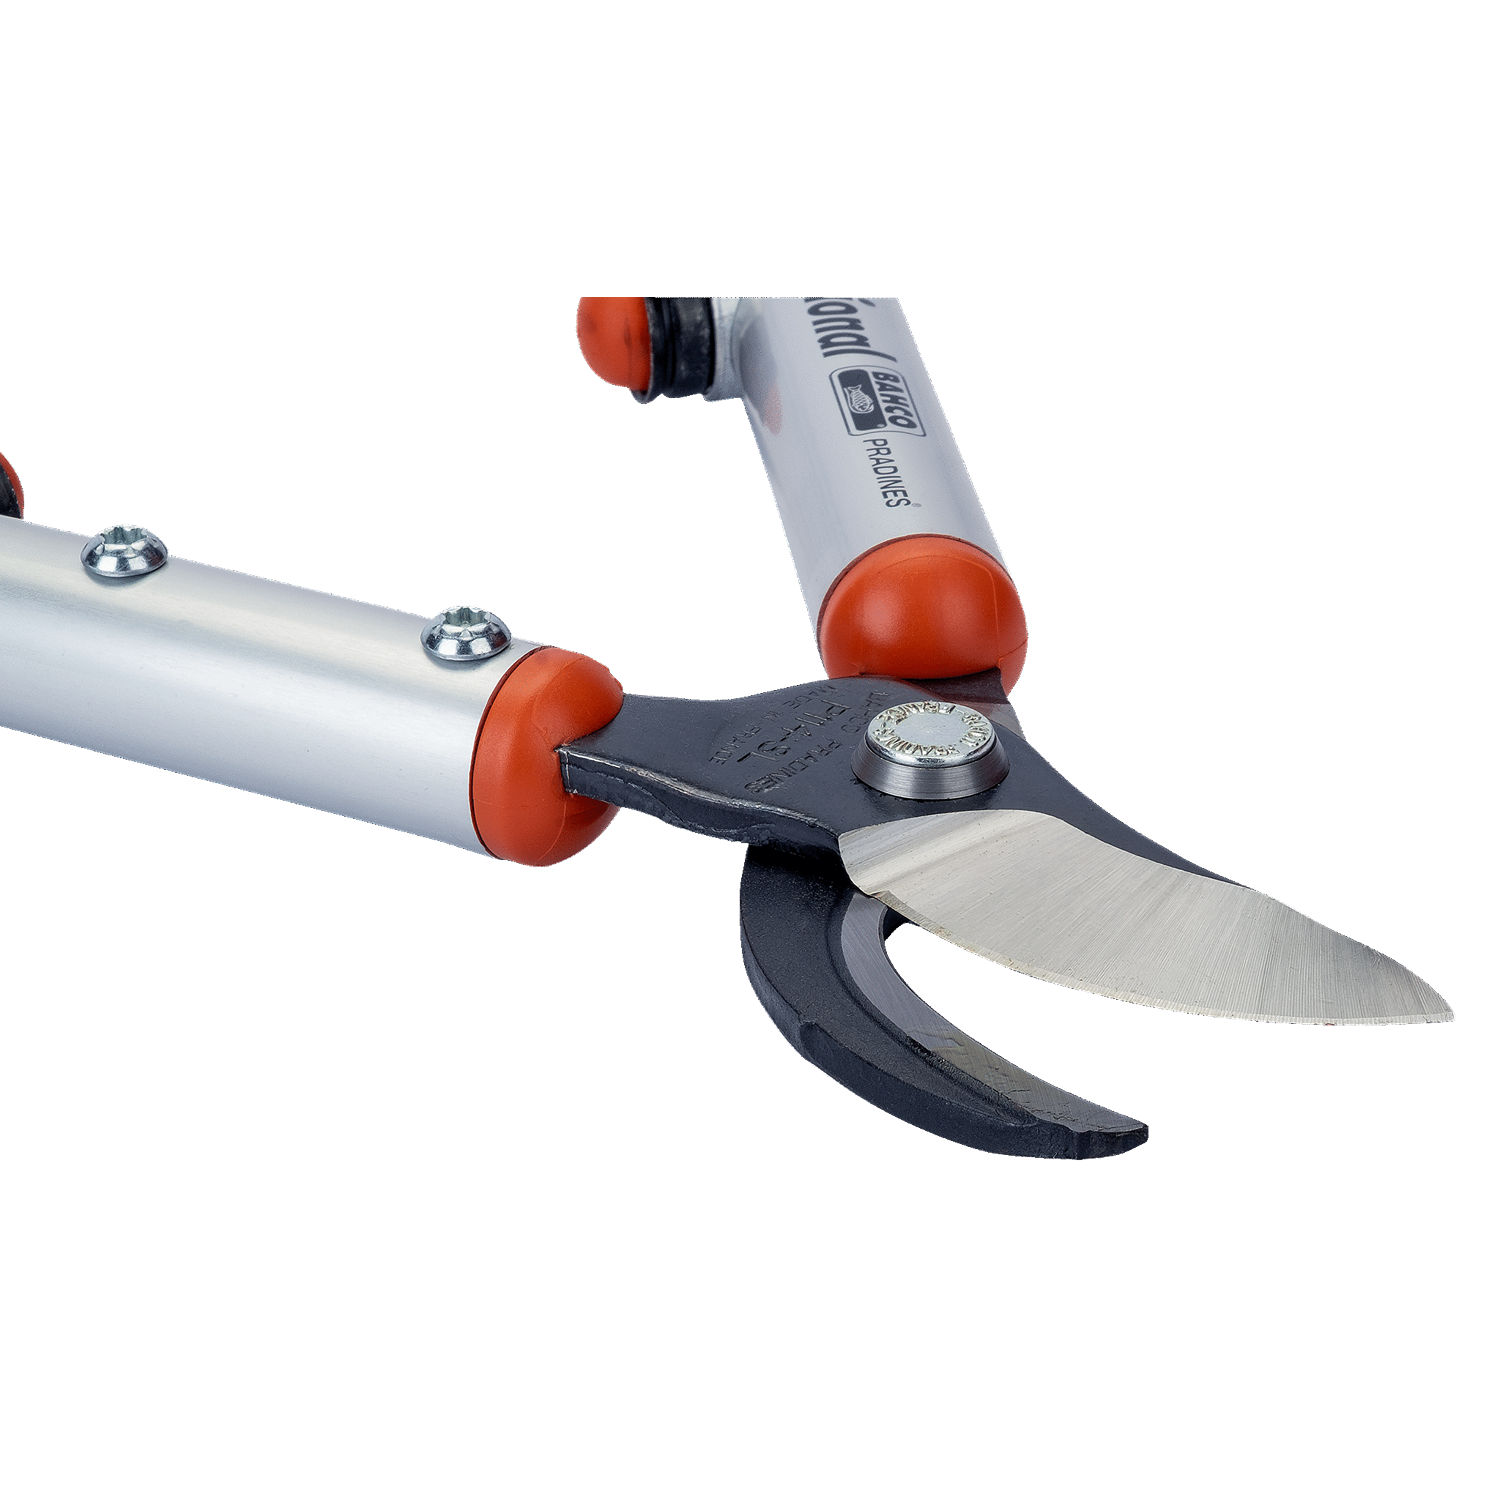 BAHCO P114-SL 30 mm Professional Lightweight Bypass Loppers - Premium Loppers from BAHCO - Shop now at Yew Aik.